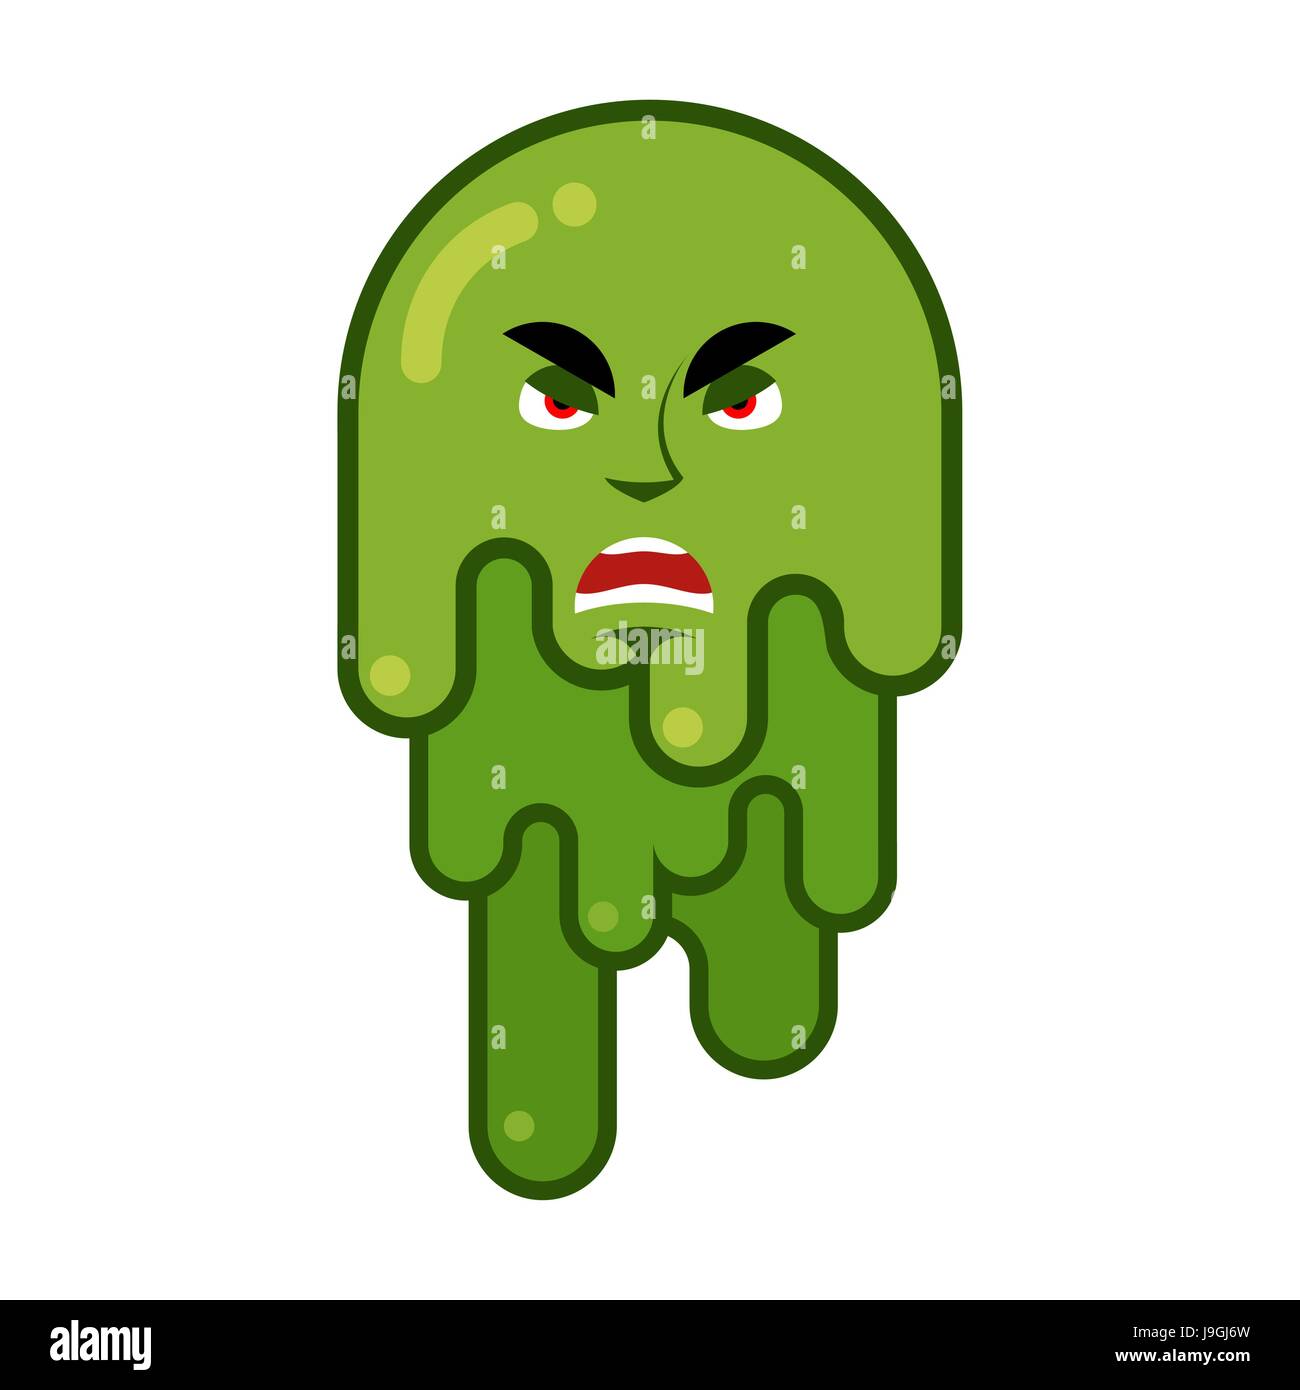 Angry snivel. Aggression emotion snot. Big green wad of mucus booger Stock Vector